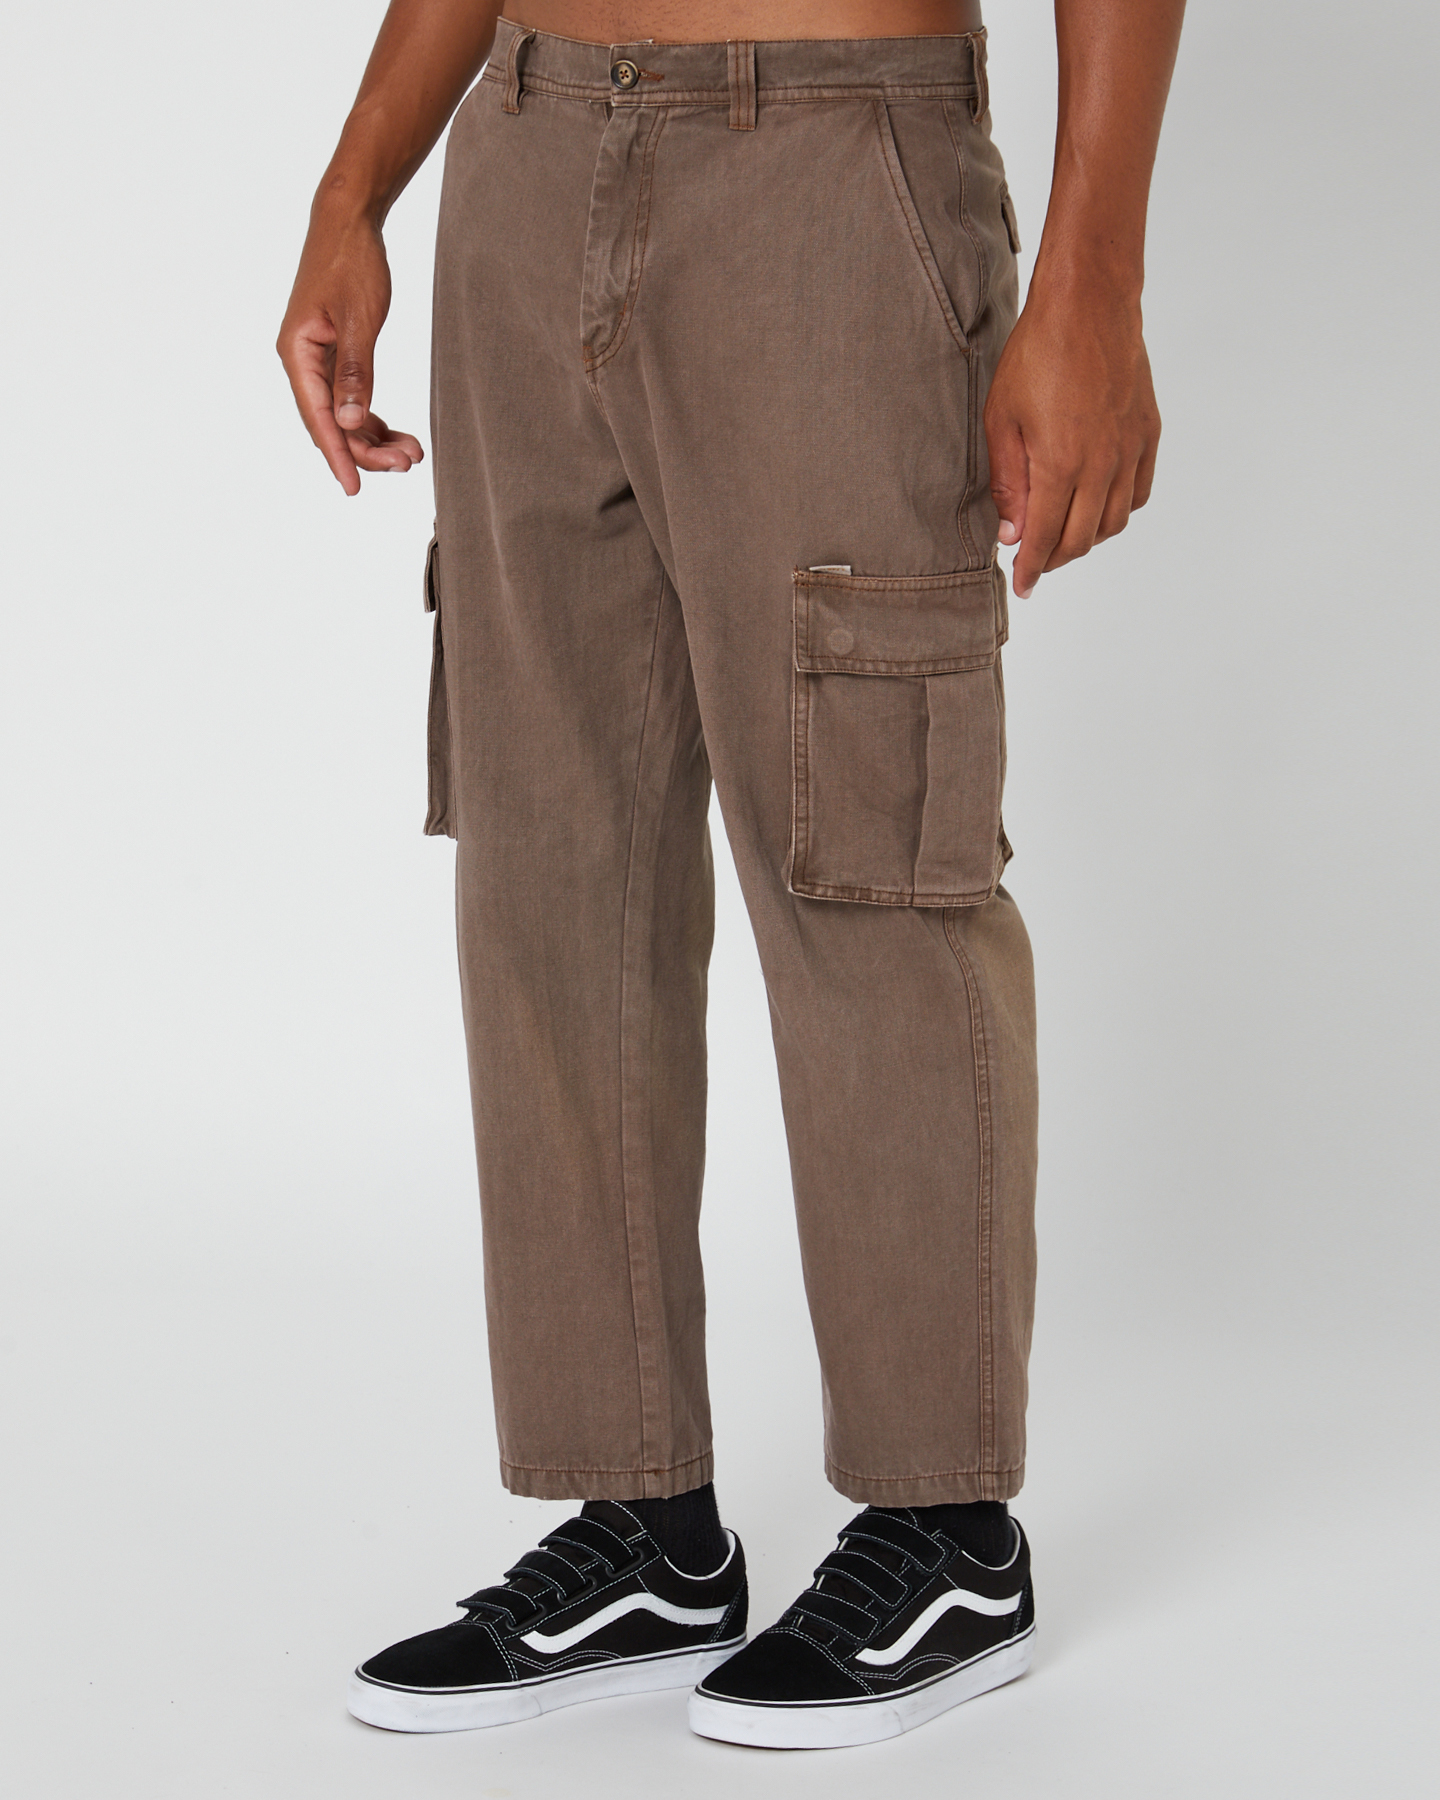 Misfit Green Onions Cargo Pant - Chocolate | SurfStitch